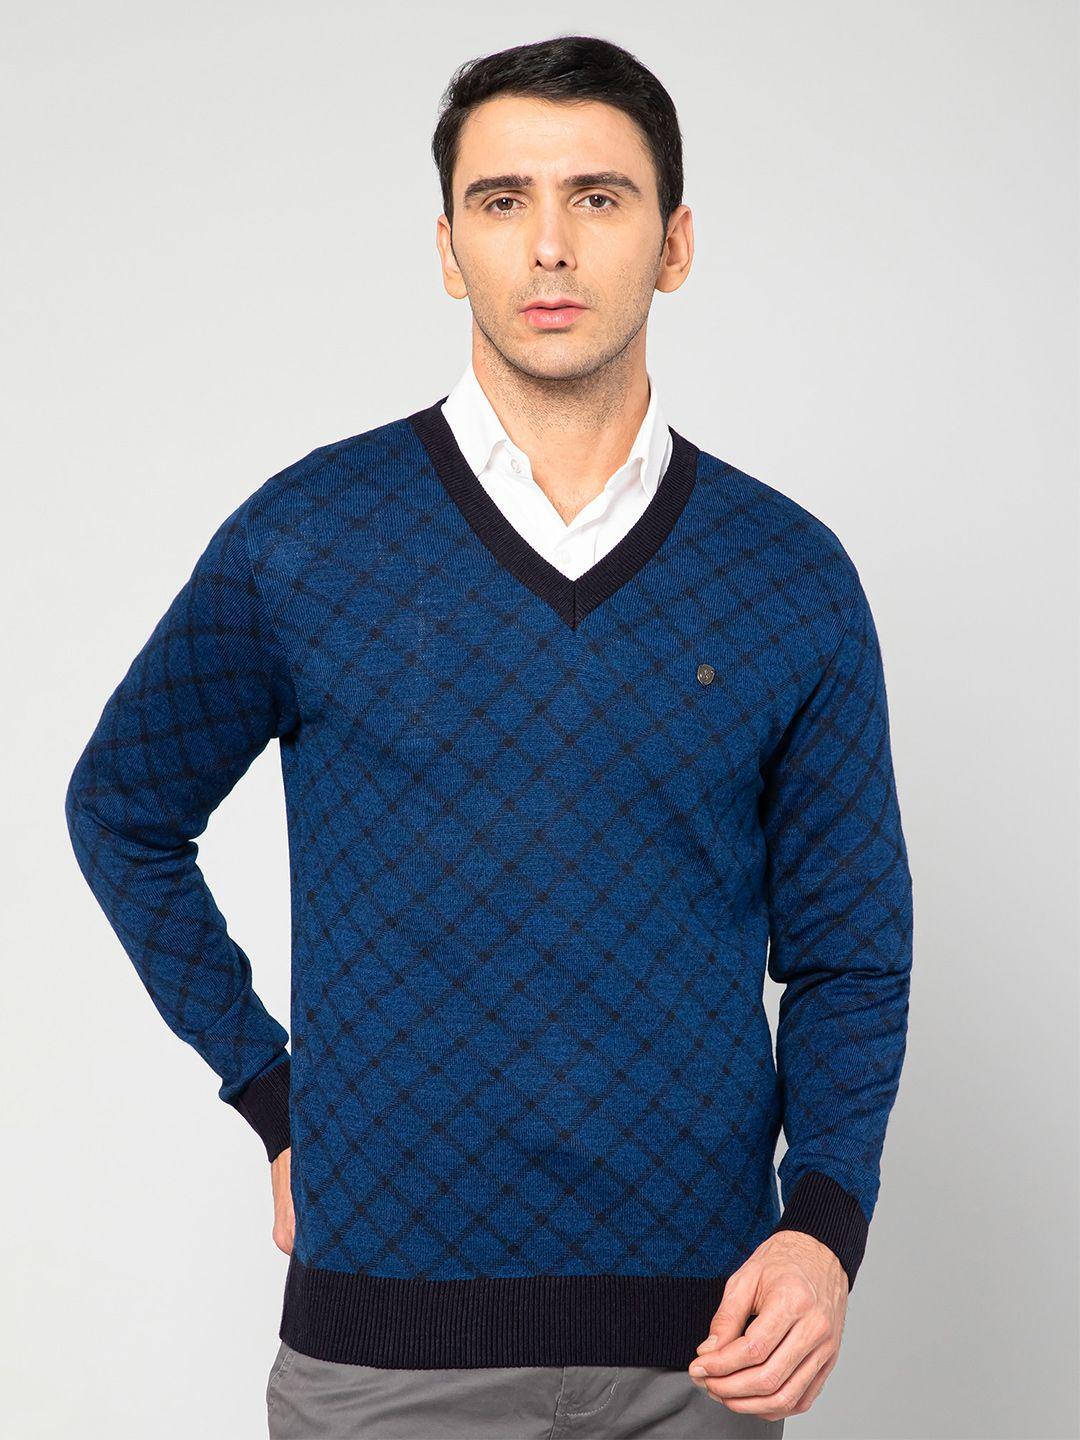 cantabil-men-blue-&-black-printed-acrylic-pullover-sweater